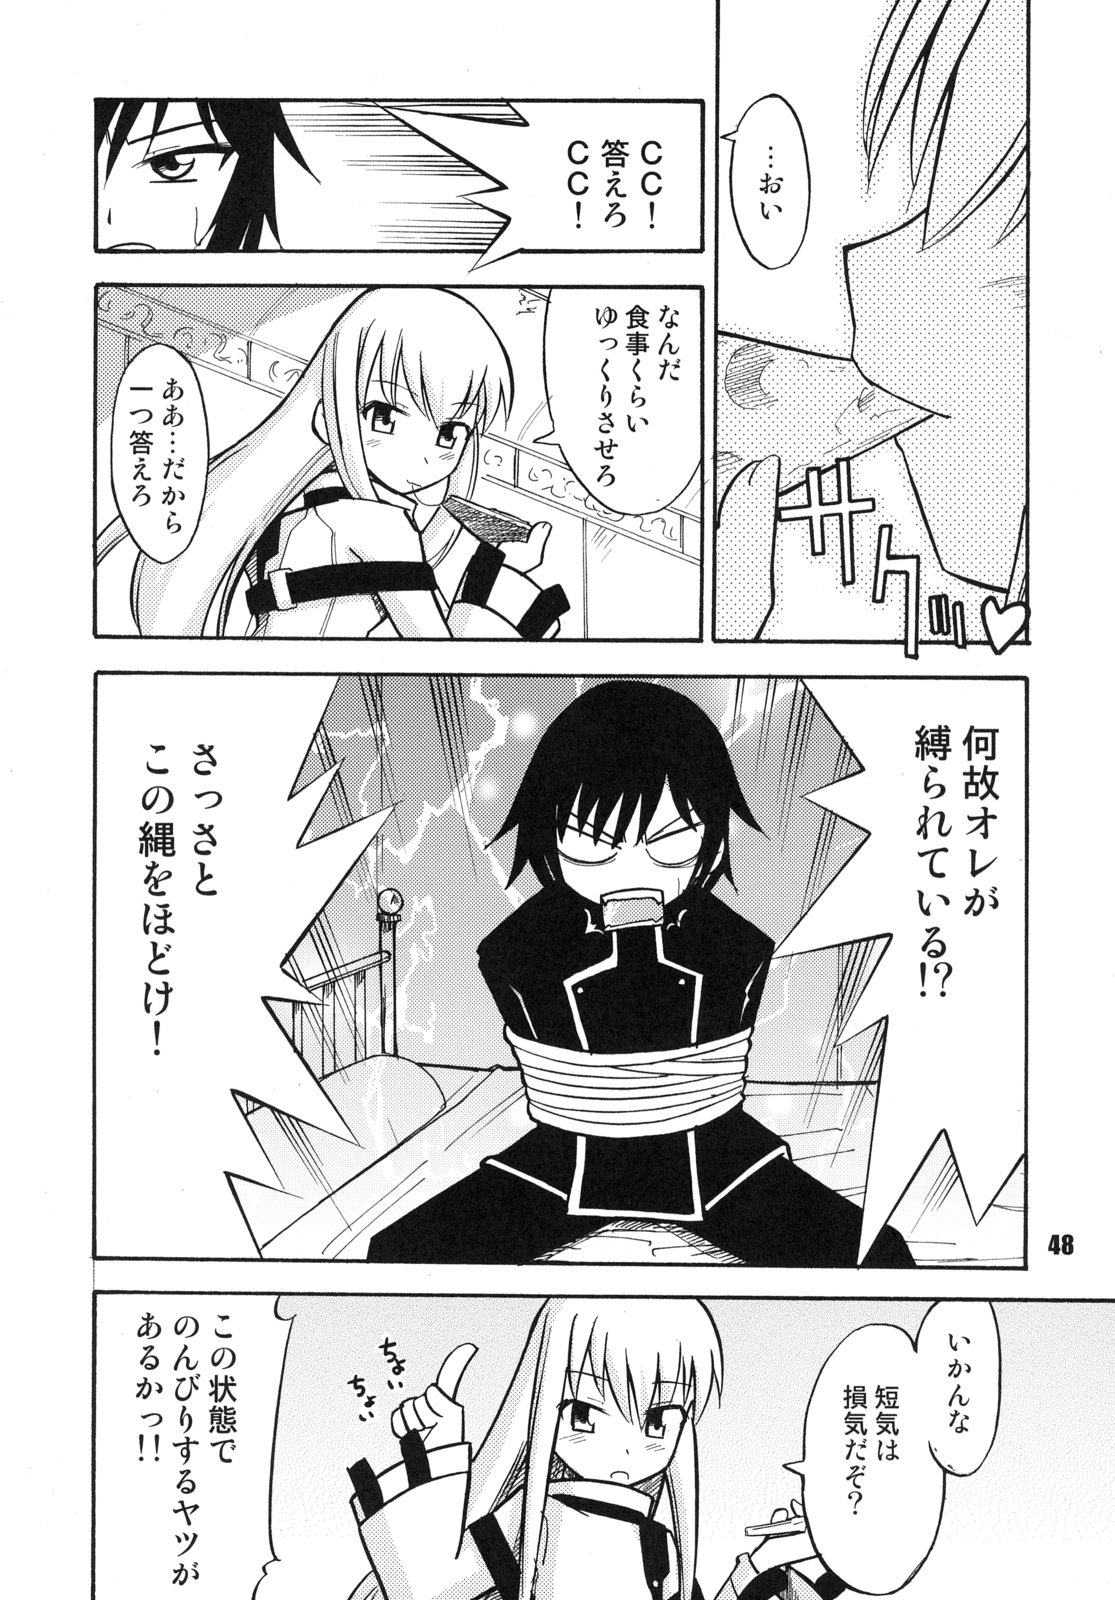 (C72) [RPG COMPANY2 (Various)] Geass Damashii (Code Geass: Lelouch of the Rebellion) page 47 full